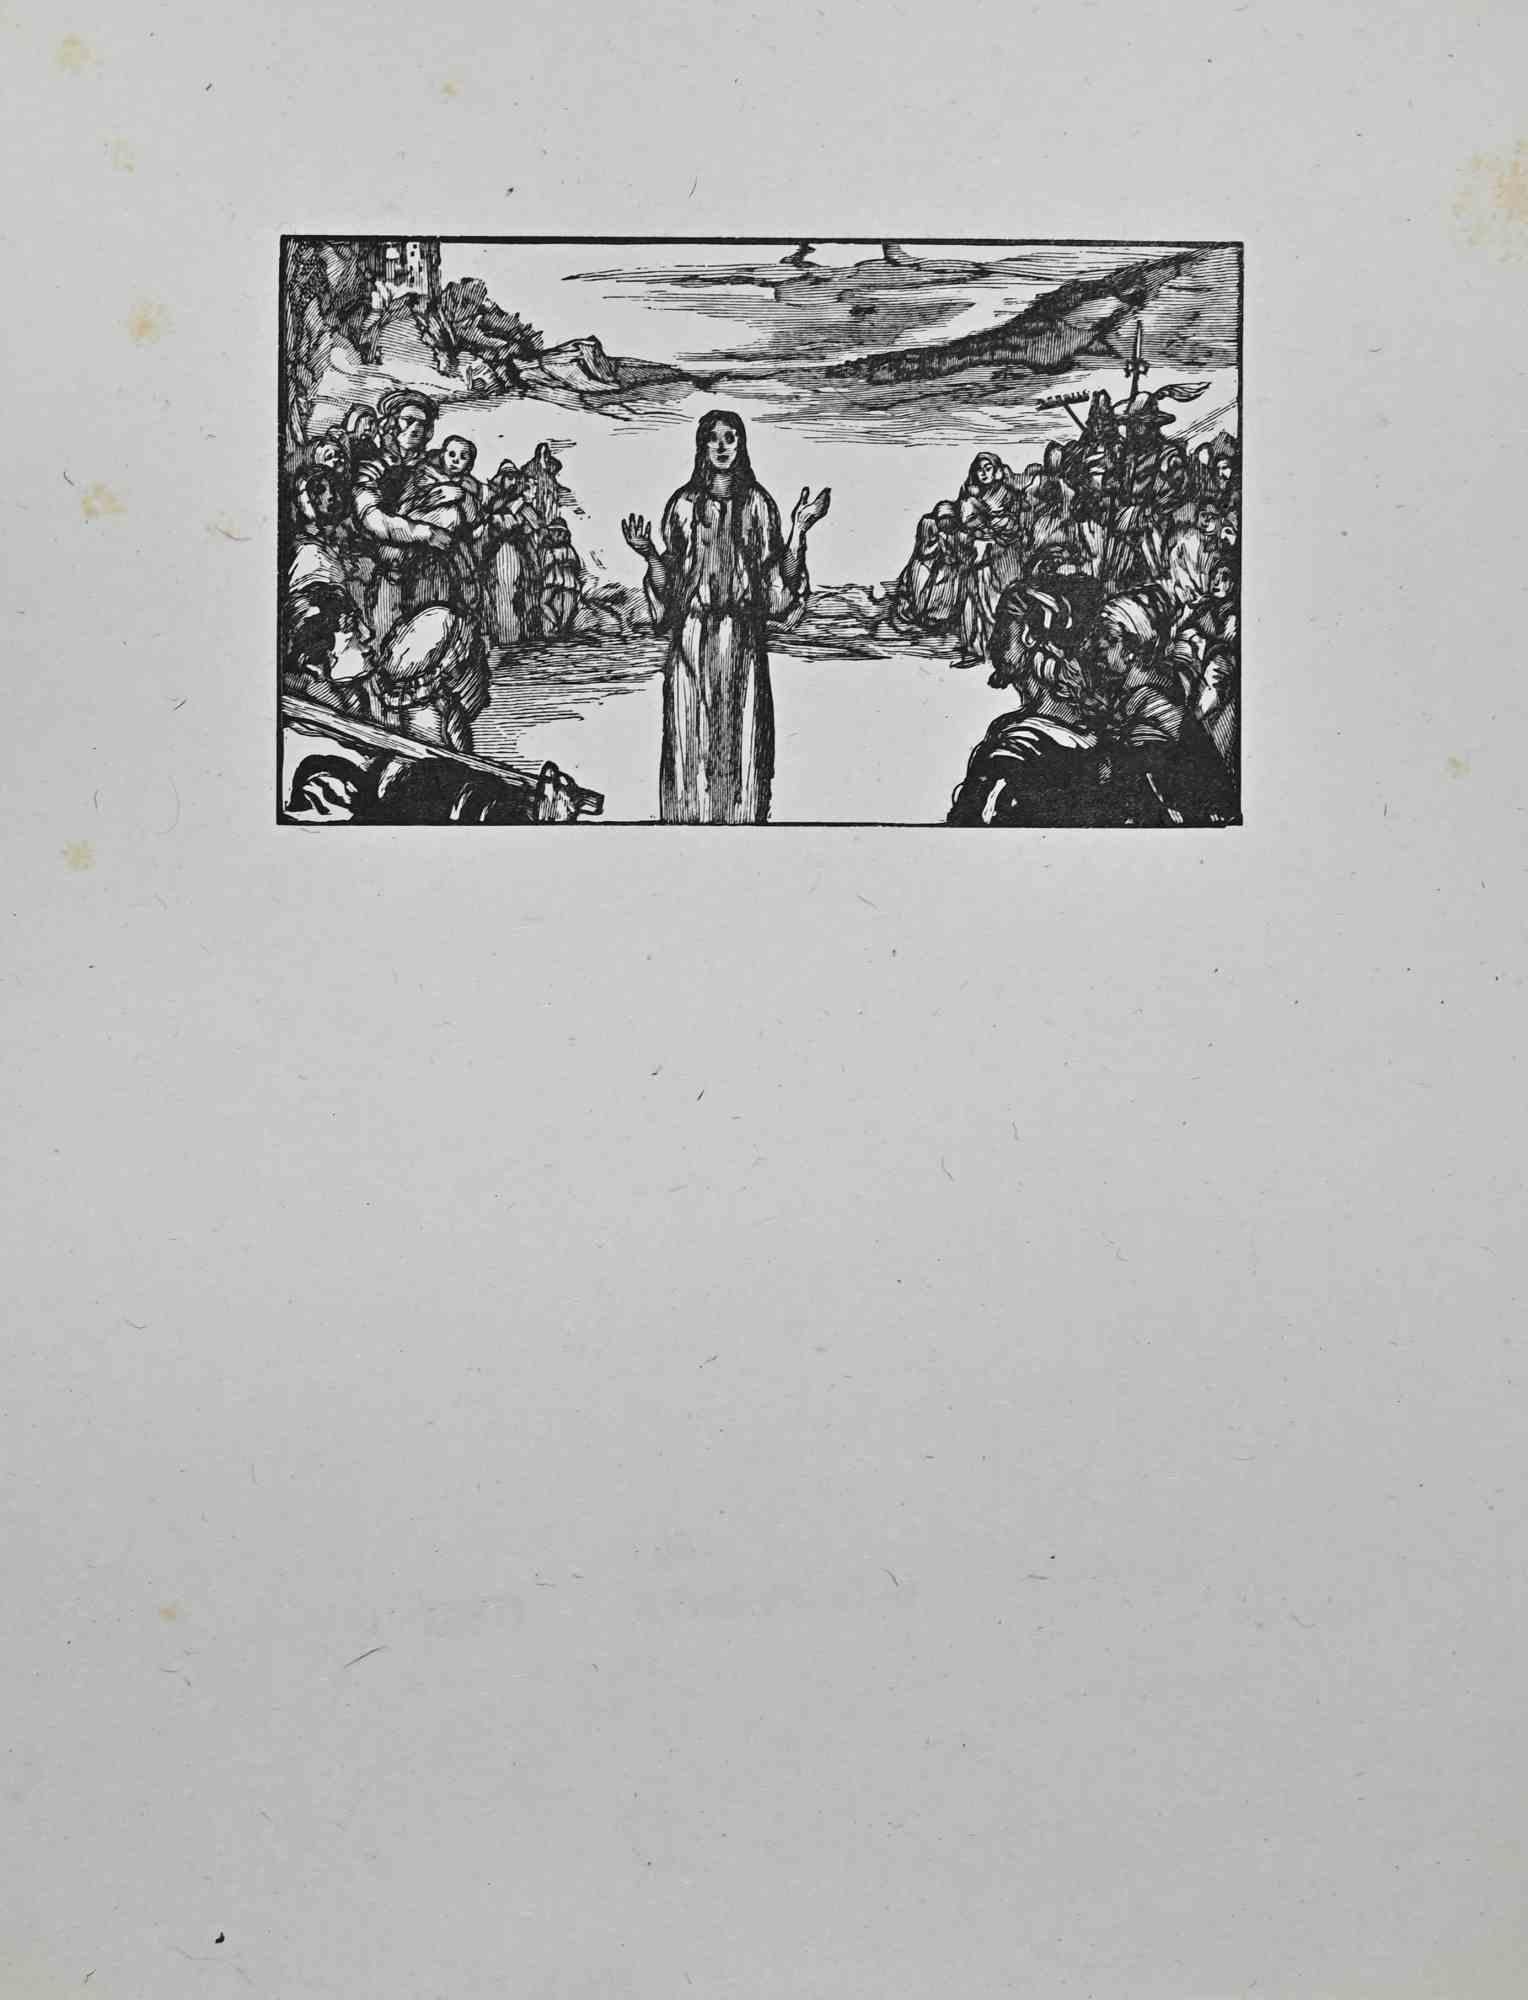 The Spiritual Speech is an original woodcut print on ivory-colored paper realized by Paul Baudier (1881-1962) in the 1930s.

Good conditions with small foxing.

Paul Baudier, (born October 18, 1881 in Paris and died December 9, 1962 in Châtillon),